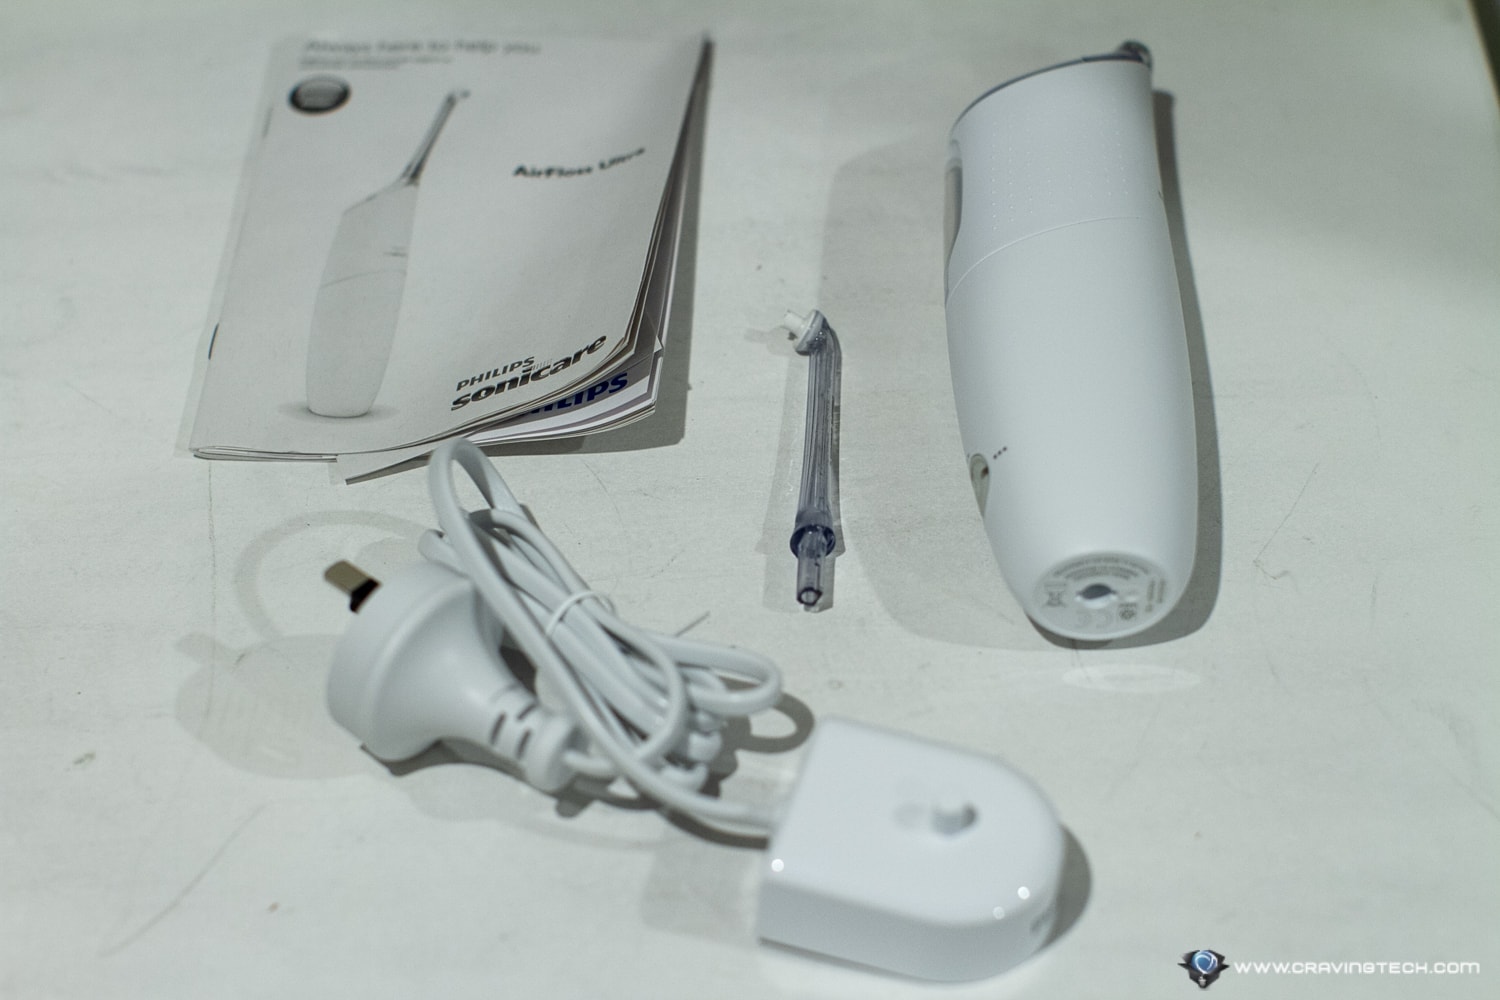 Philips-Sonicare-AirFloss-Ultra-Unboxing